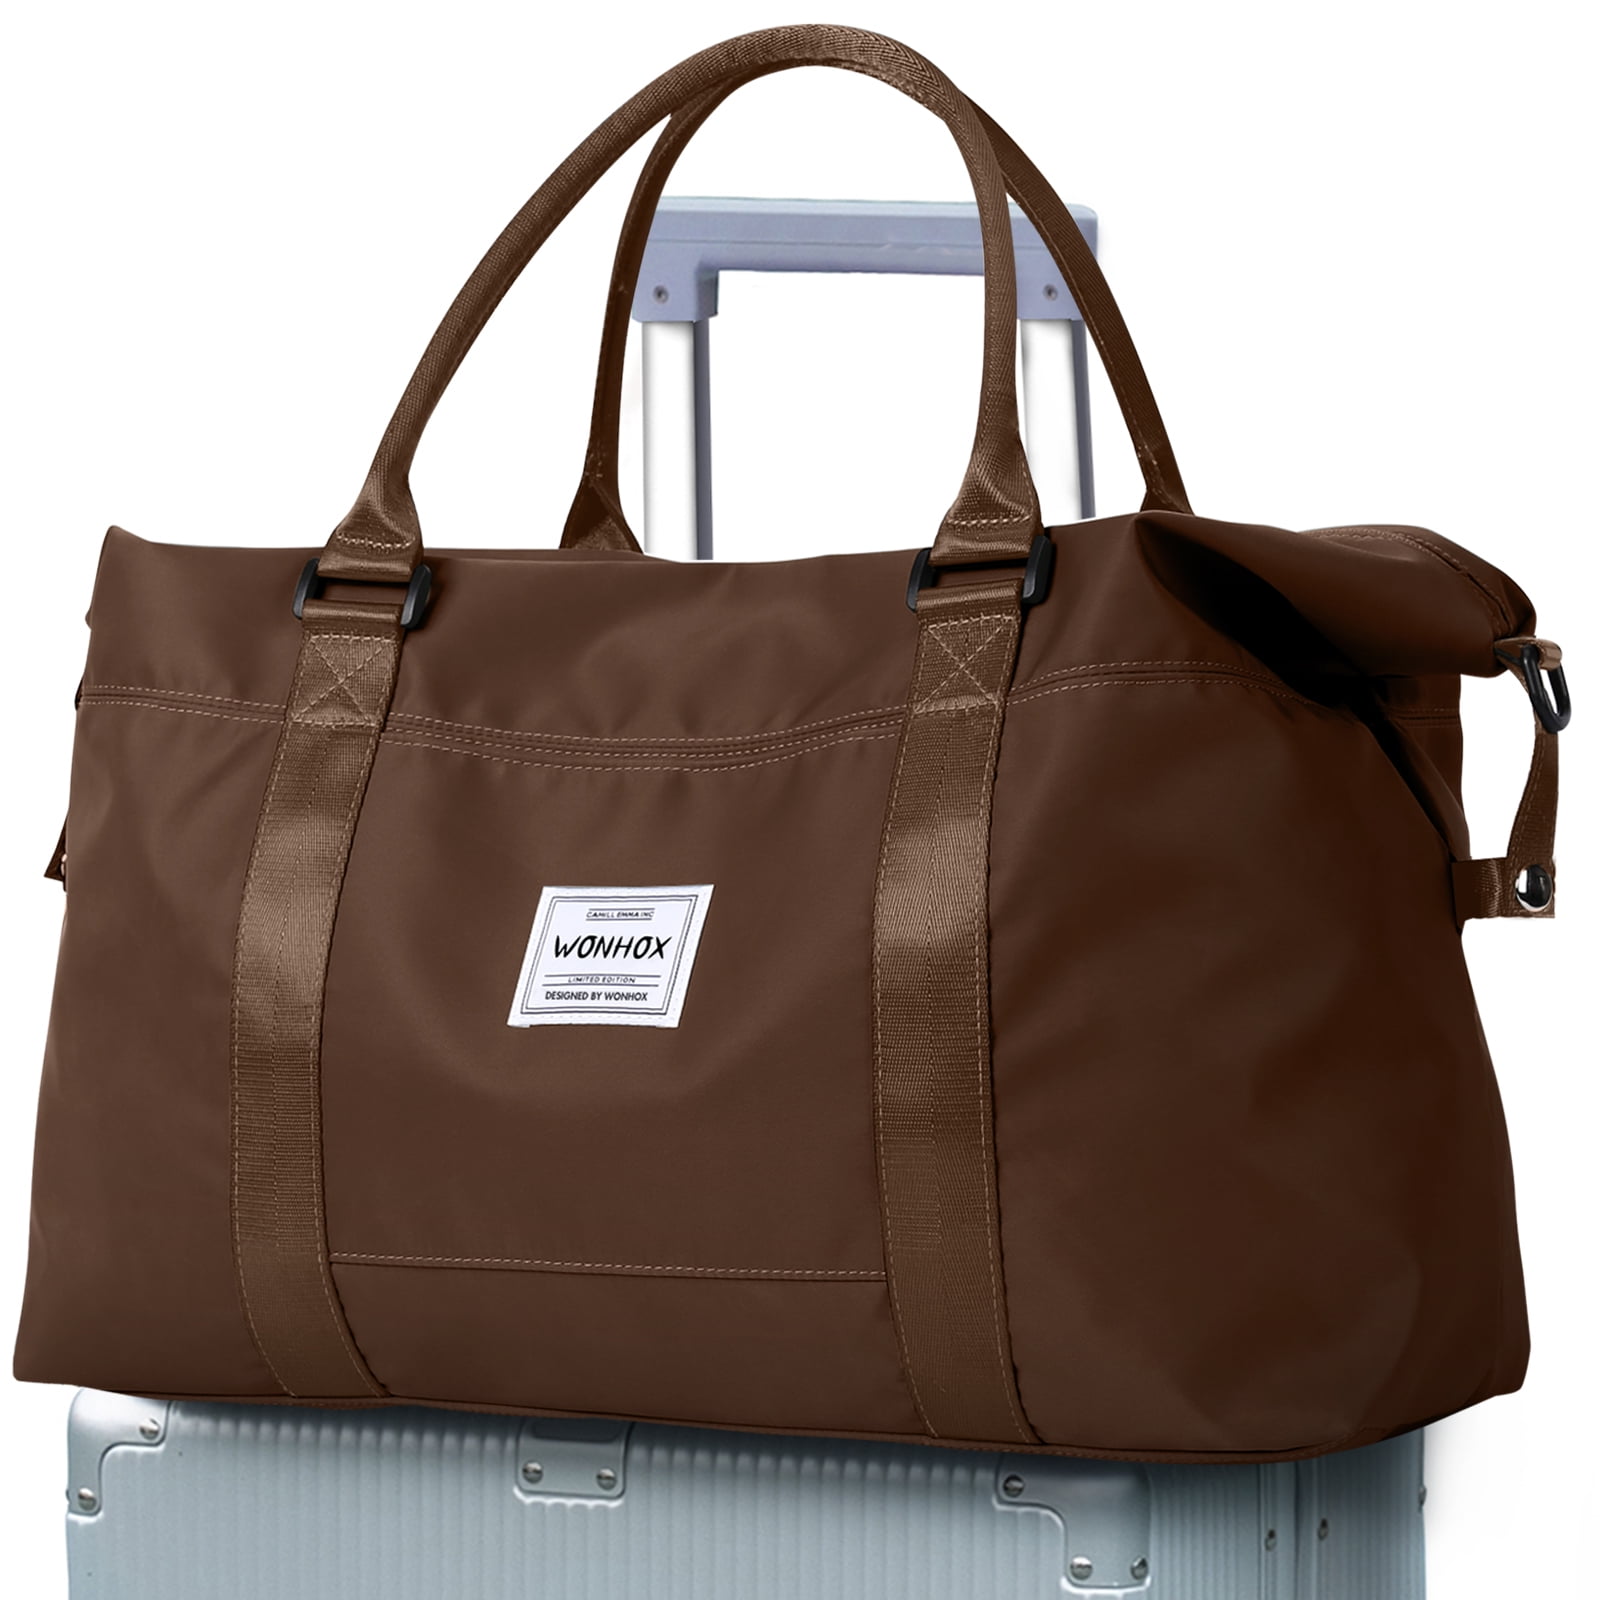 Weekender Bags for Women,Travel Duffle Bags Carry on Gym Bag